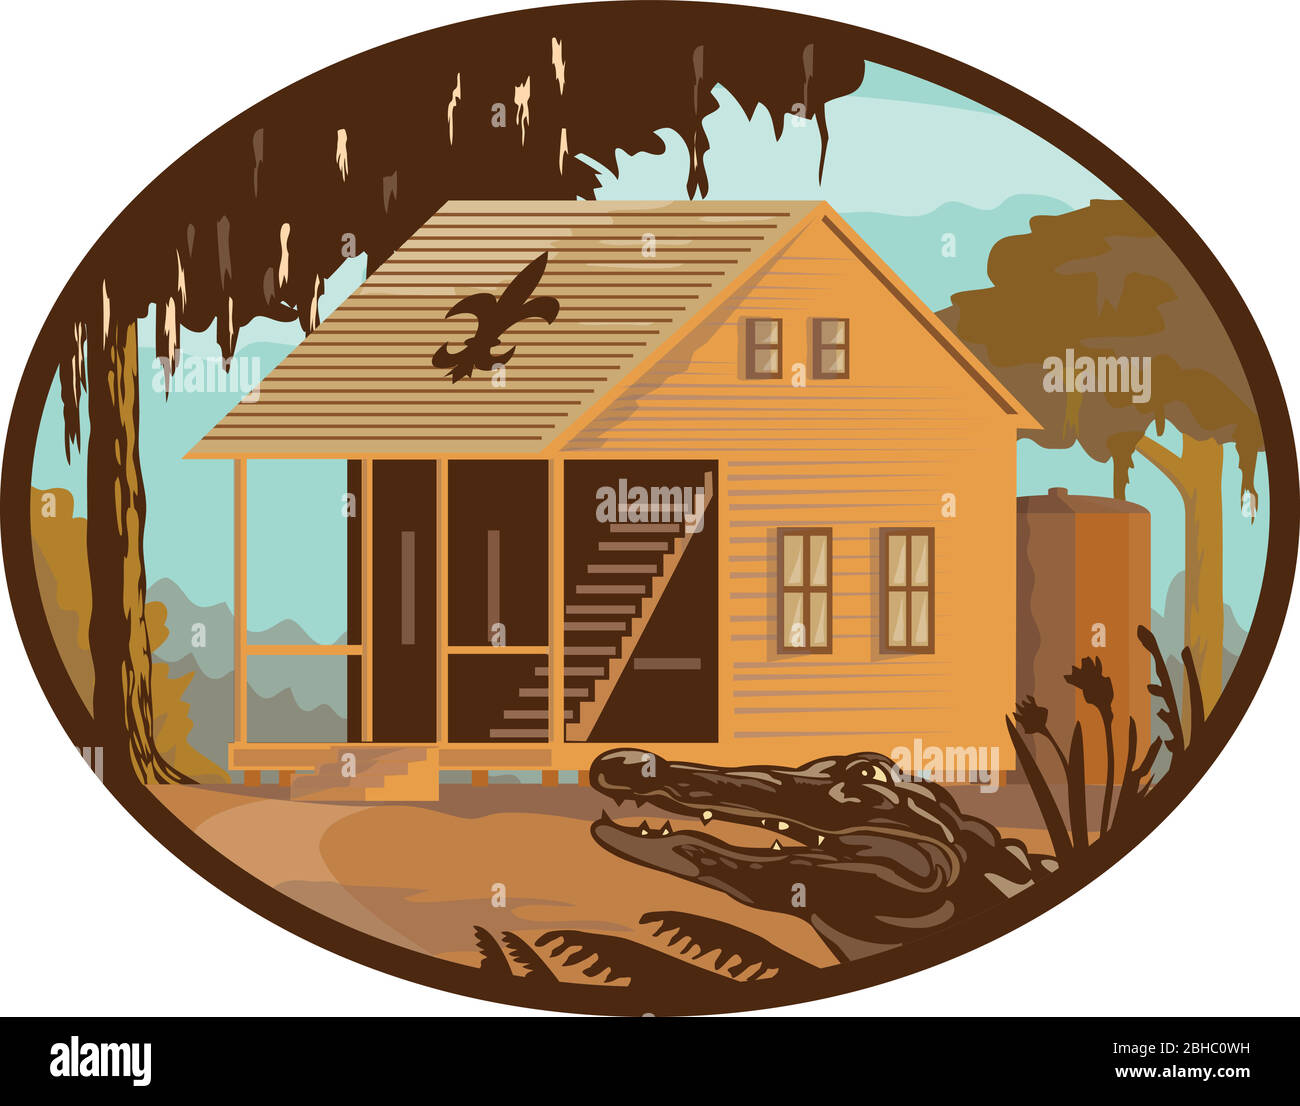 Retro wpa style illustration of a typical Cajun house, a country French architecture found in Louisiana and across the American southeast and alligato Stock Vector